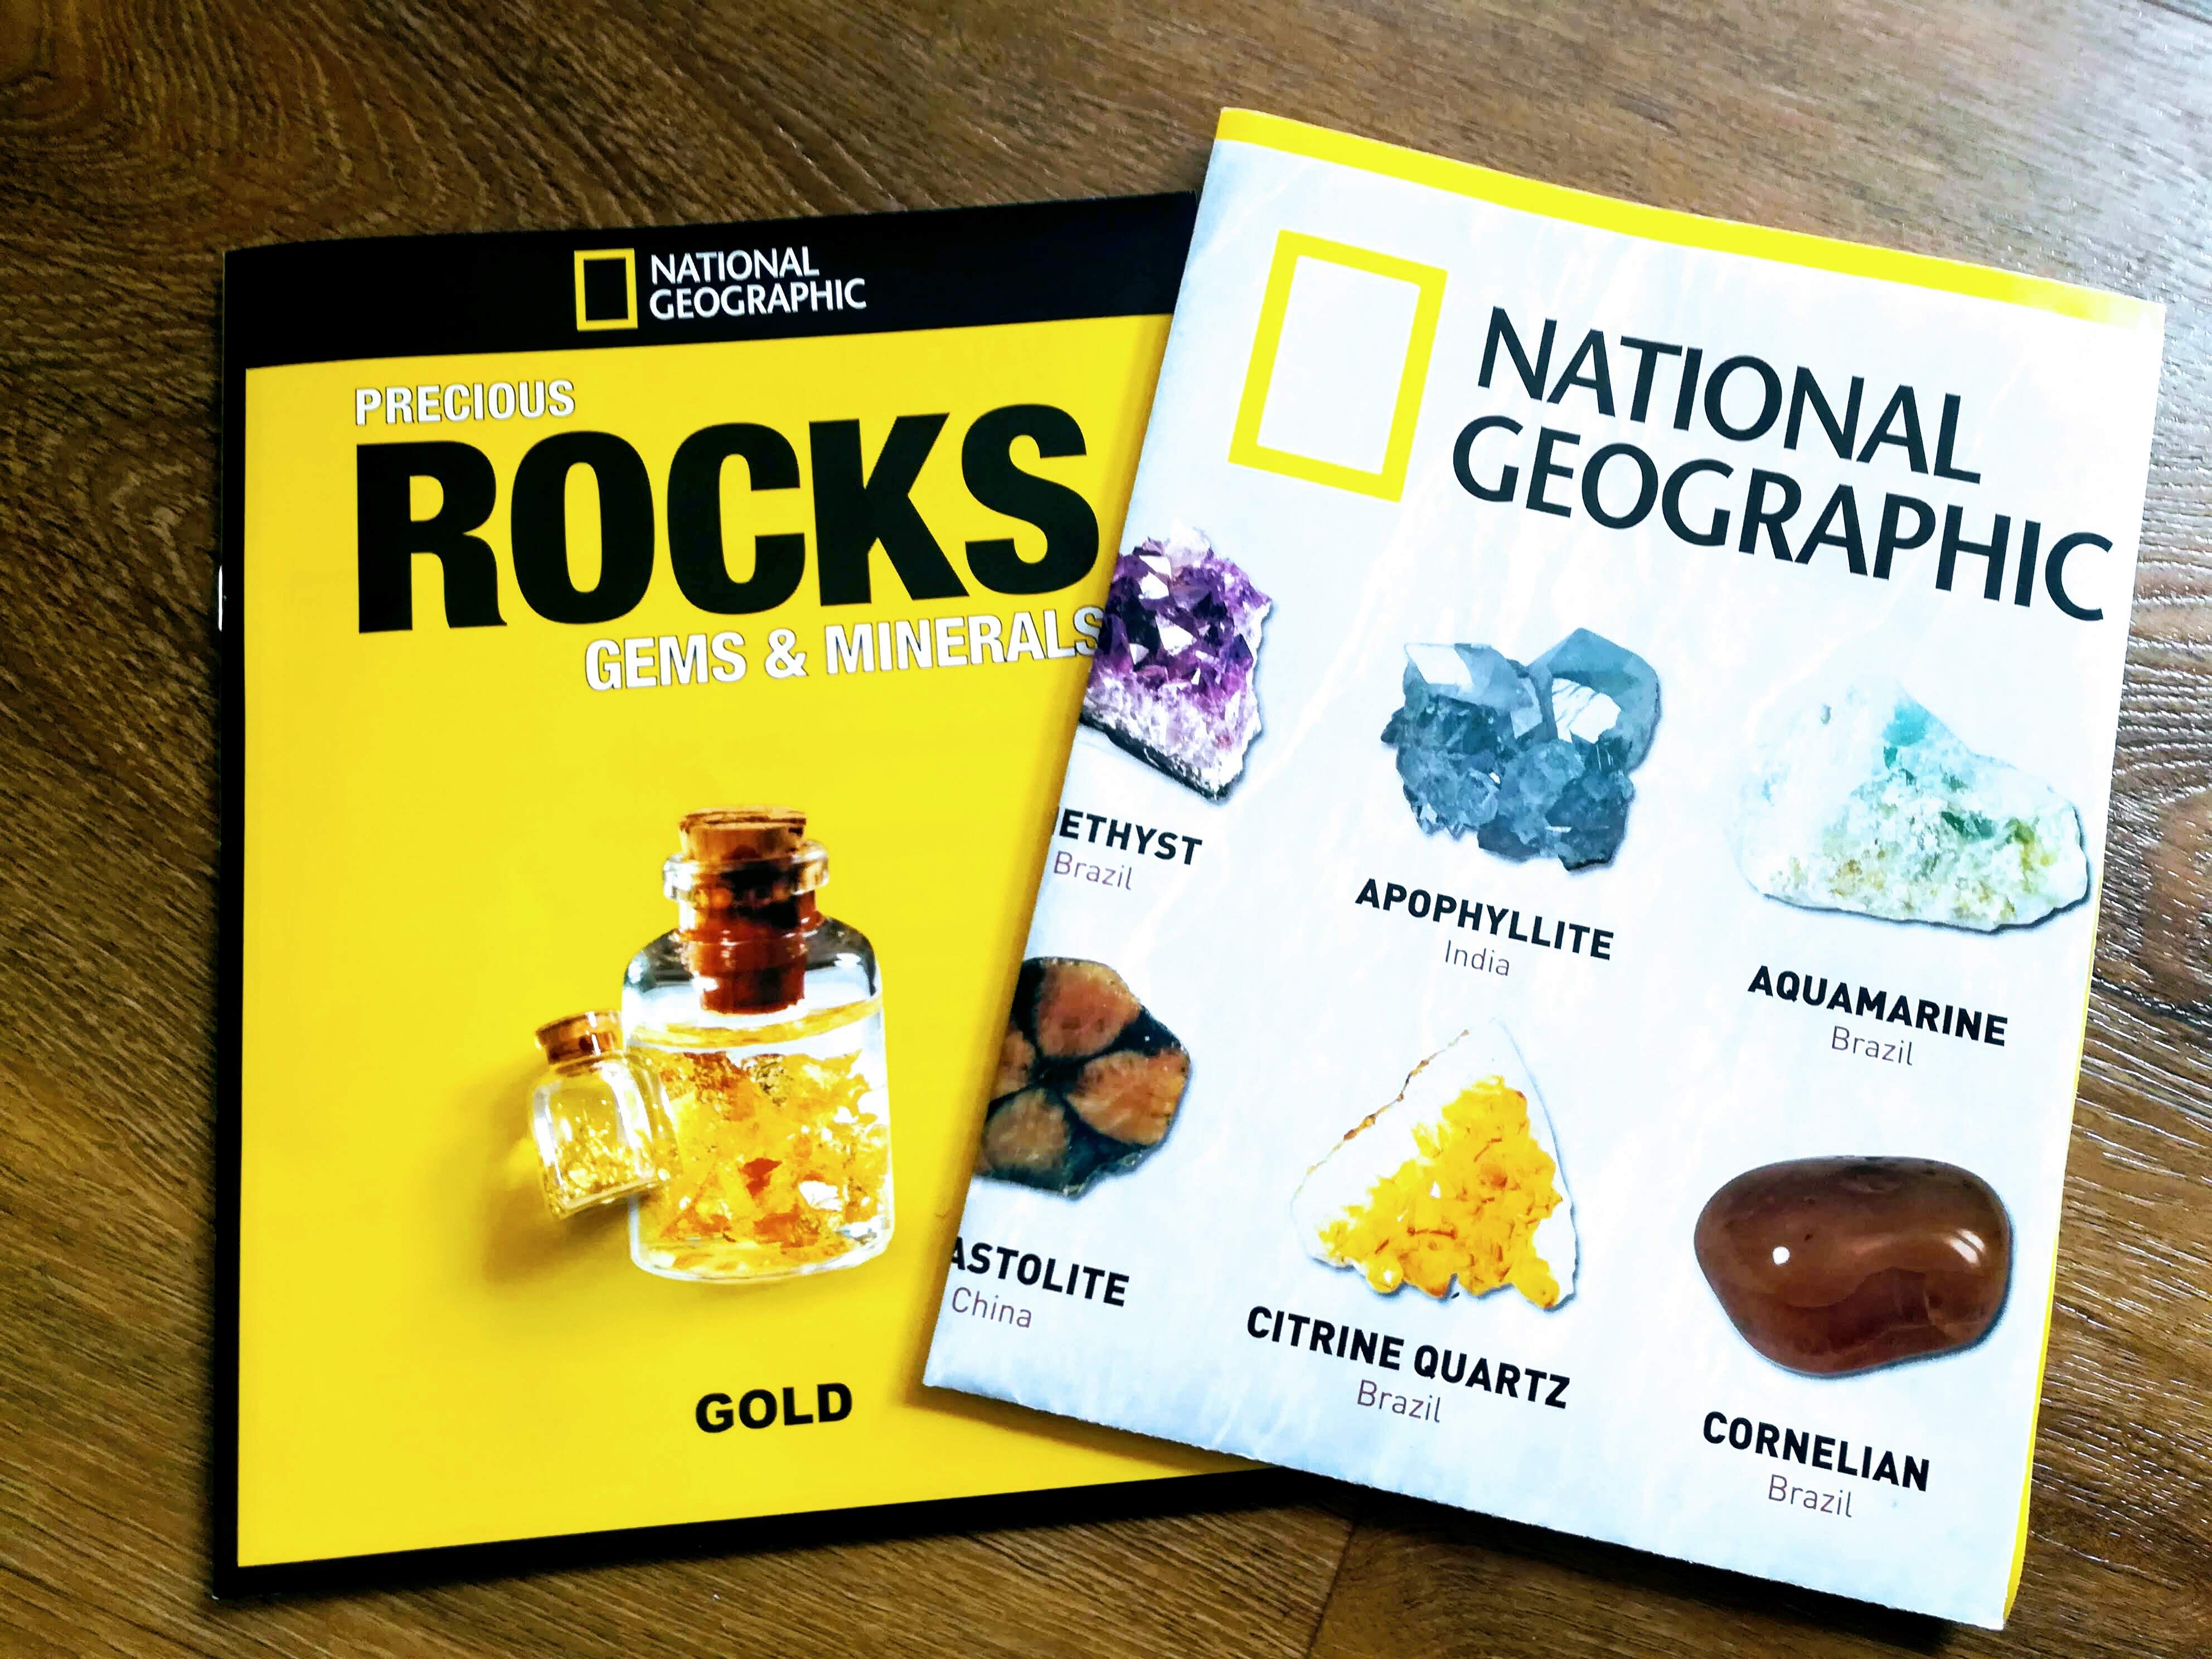 National Geographic Precious Rocks Gems and Minerals